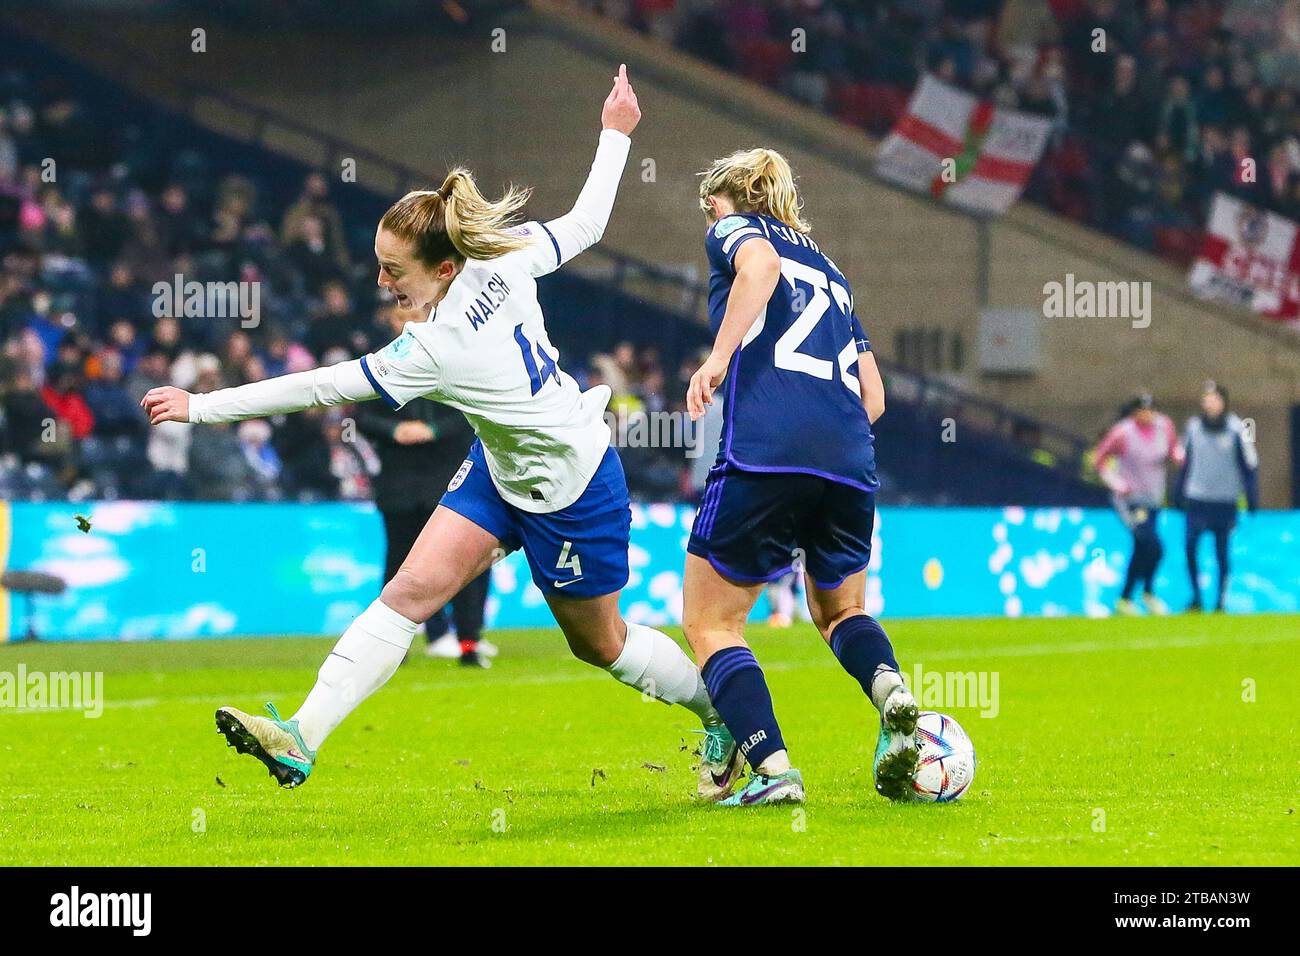 Glasgow, Scotland, UK. 05 Dec 23. Glasgow, UK. Scotland played against England in the UEFA Women's League, at Hampden Park, Glasgow, Scotland, UK. This is the final game for both teams in the UEFA Women's Nations League campaign, Credit: Findlay/Alamy Live News Stock Photo